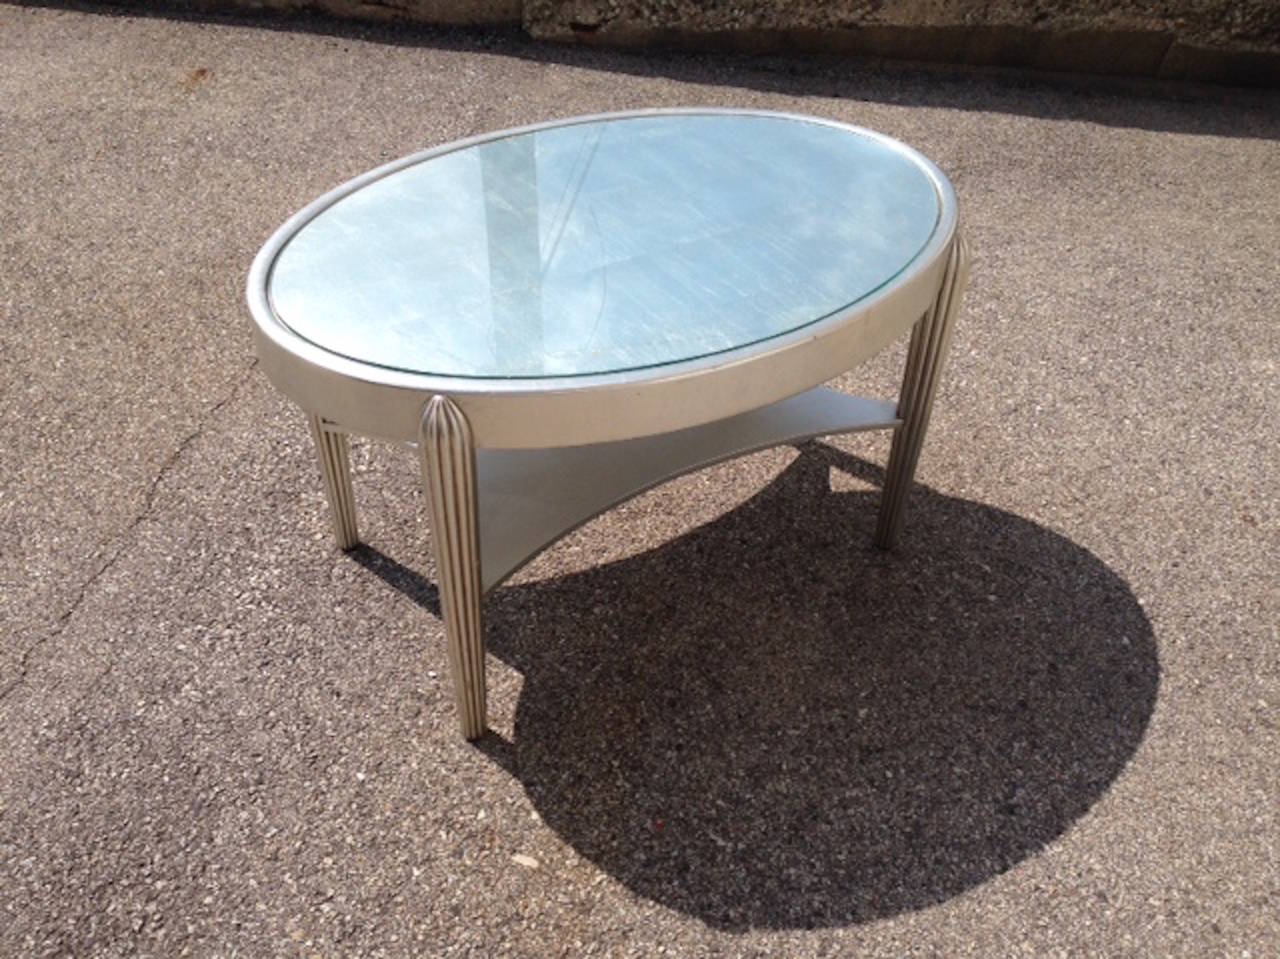 Two Art Deco Style silver leaf side tables. Inset glass top. Note priced per table.  Feel free to call with questions.